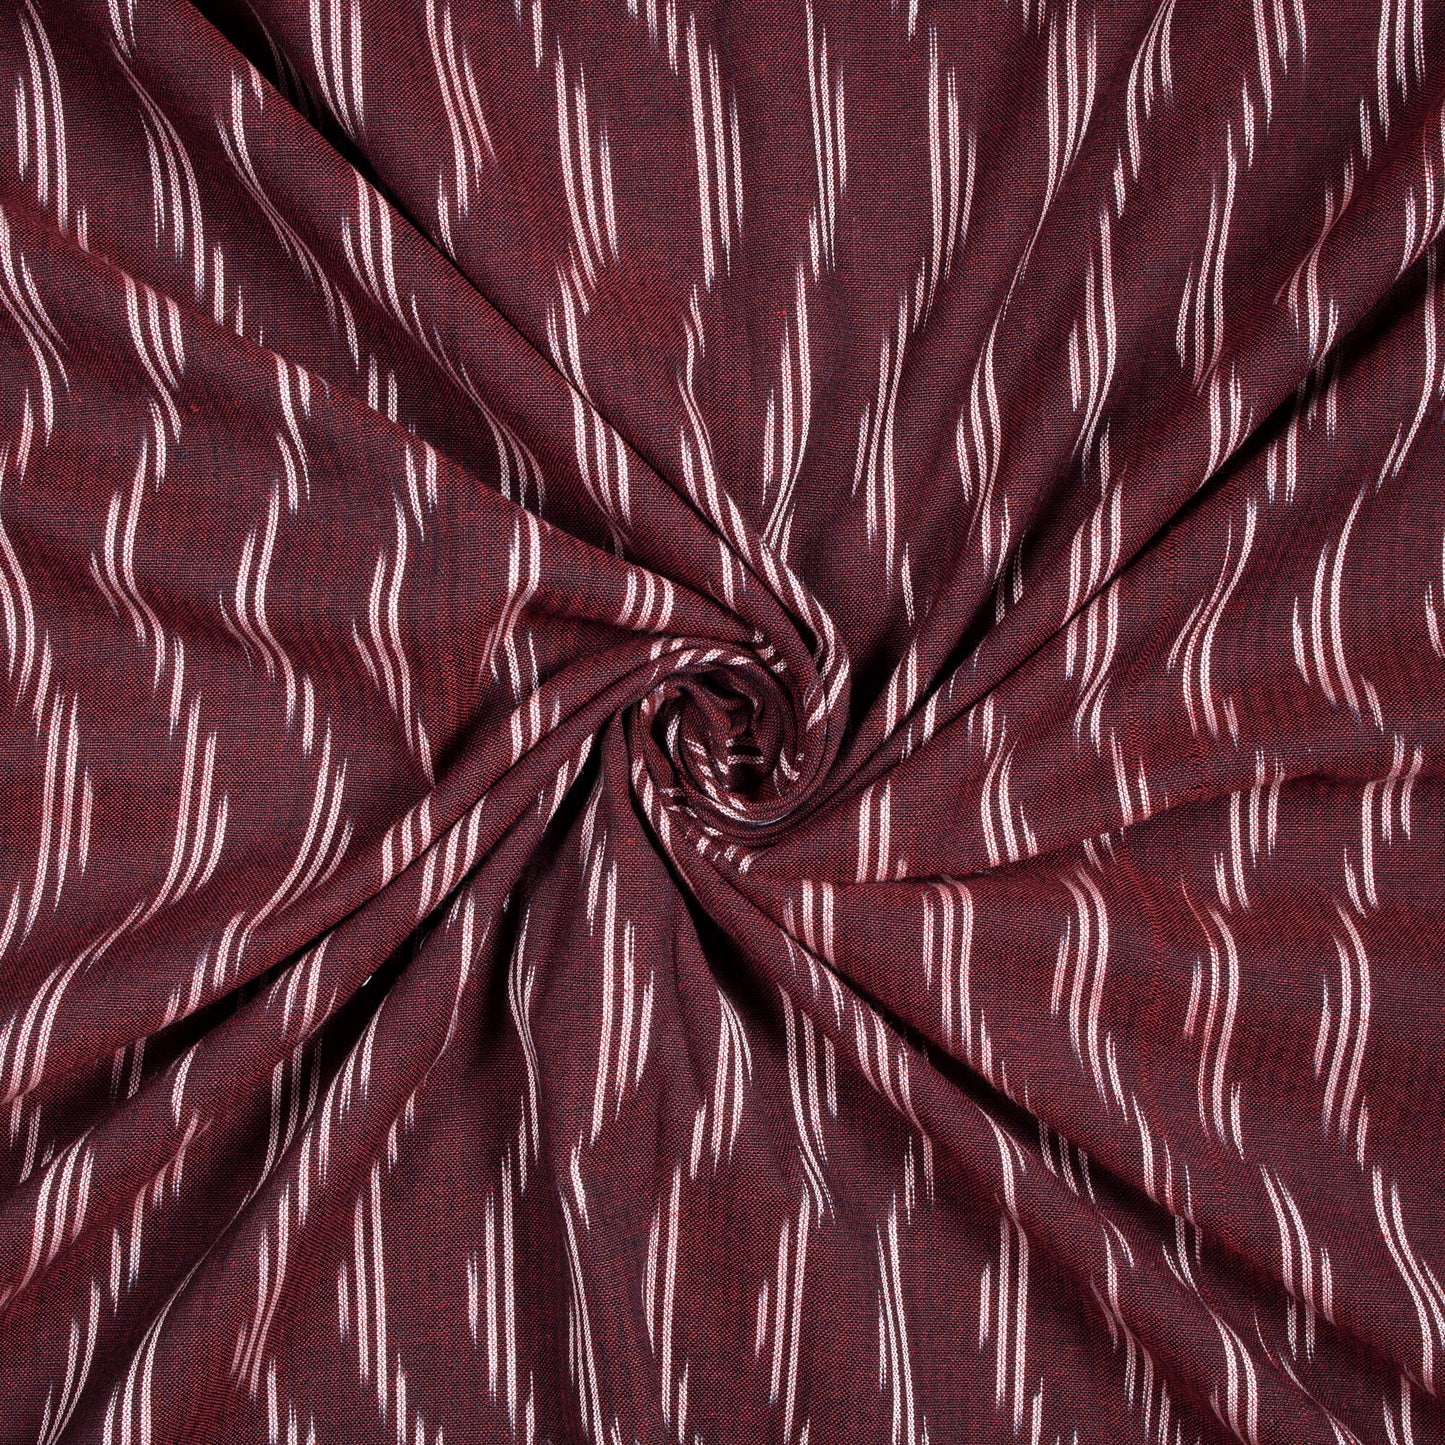 Blood Red Stripes Pattern Pre-Washed Ikat Cotton Fabric